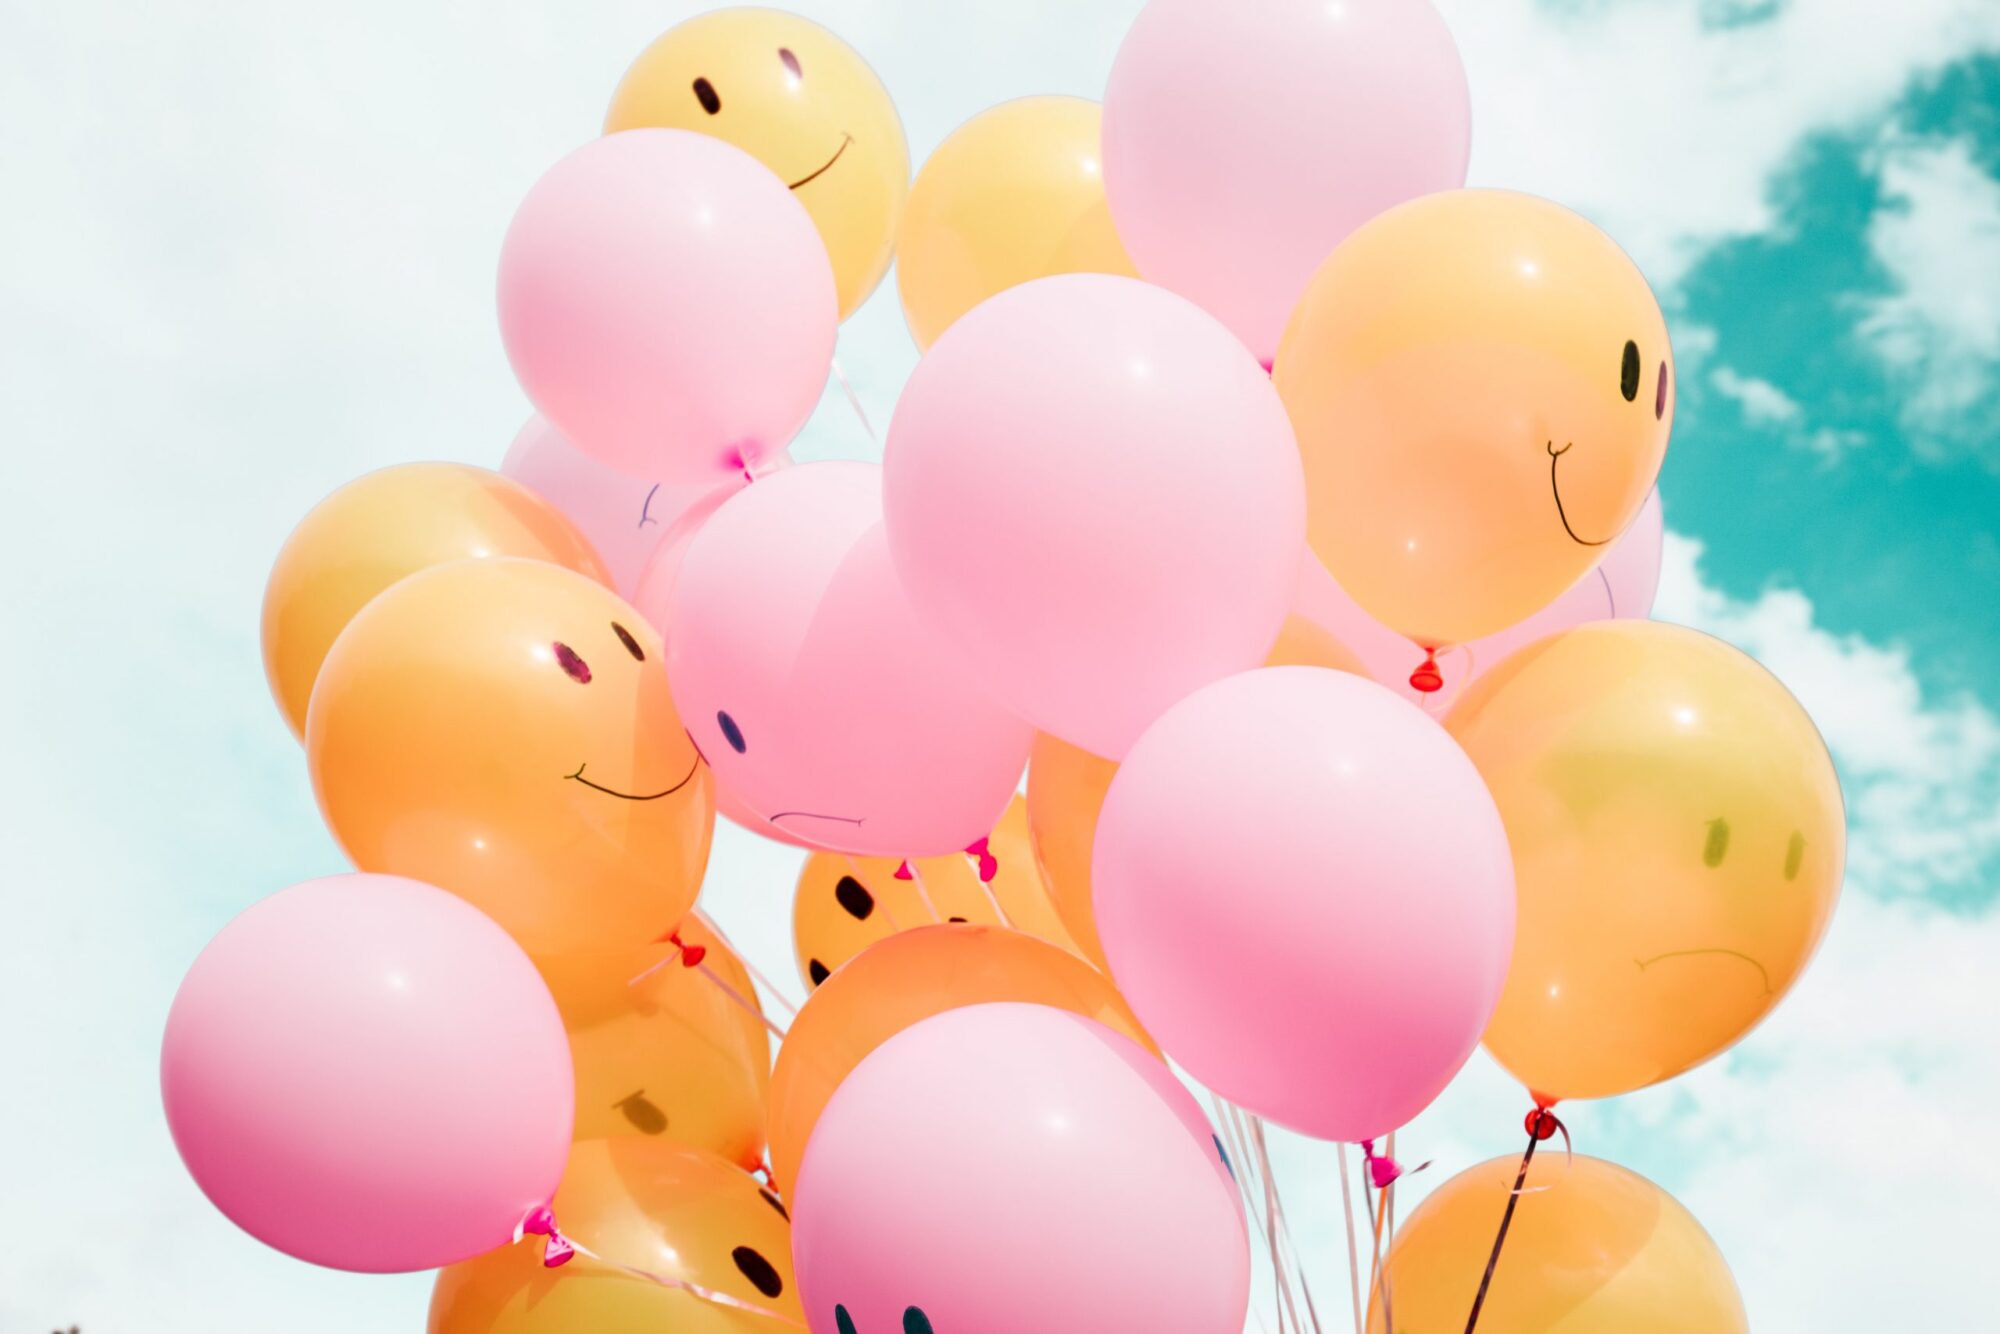 Image of a dozen balloons with smileys on it